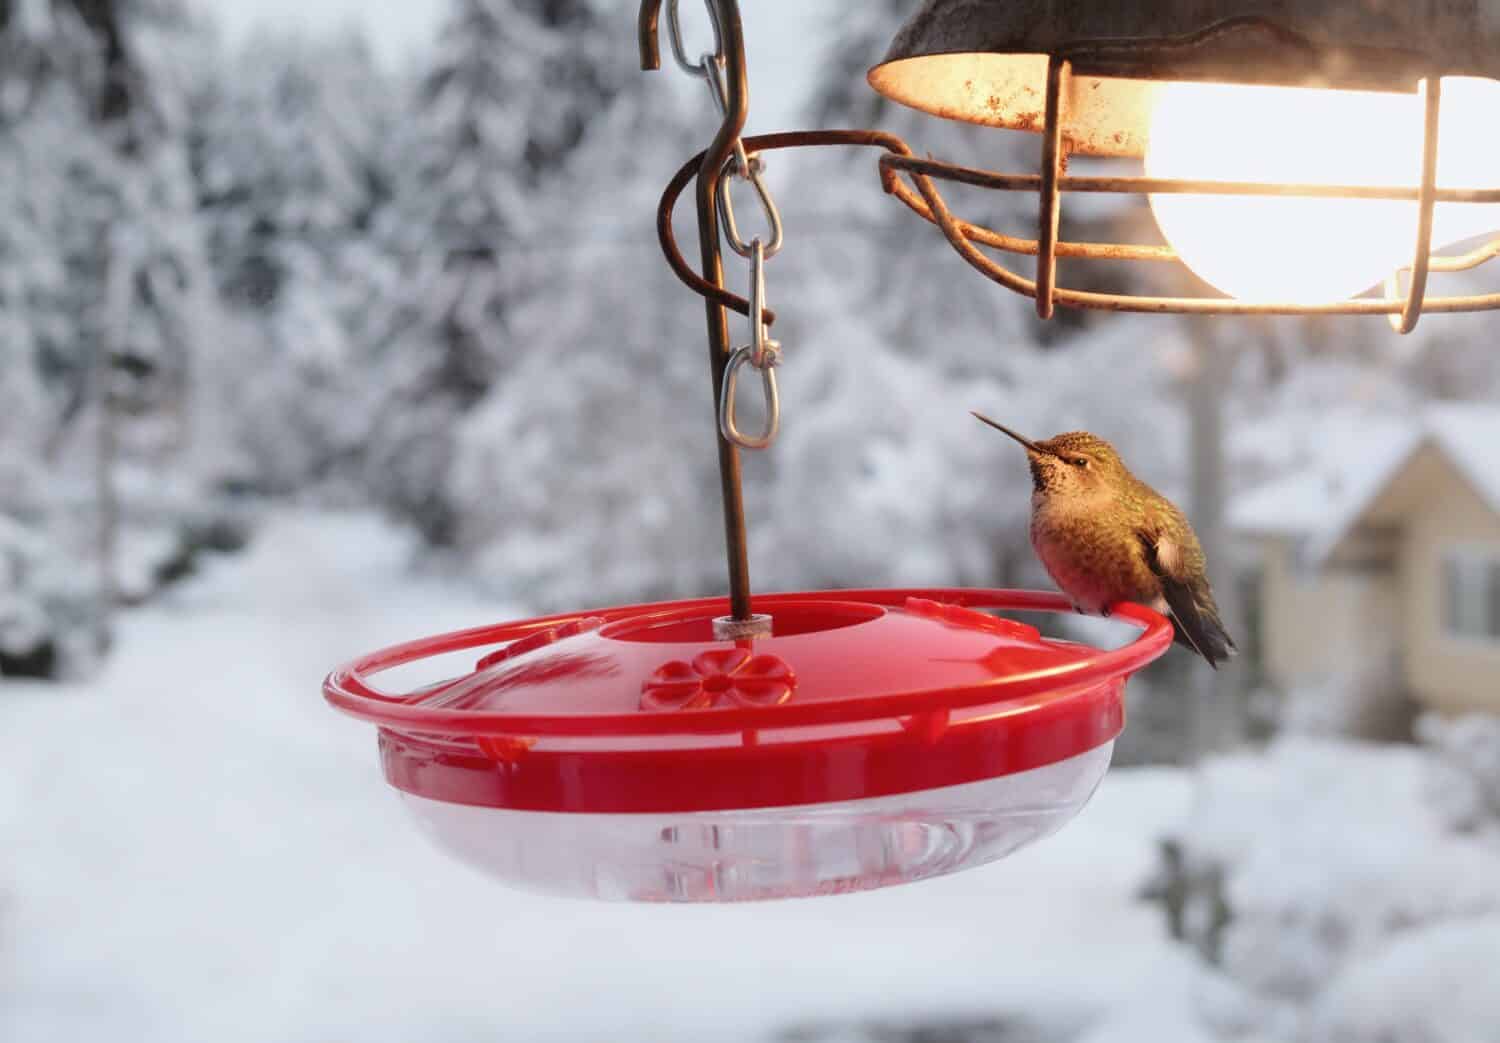 Hummingbird on feeder with heating lamp in front of residential winter scene. Hummingbird heaters are used to keep the nectar or sugar from freezing. Hummingbird sitting by the heat. Selective focus.